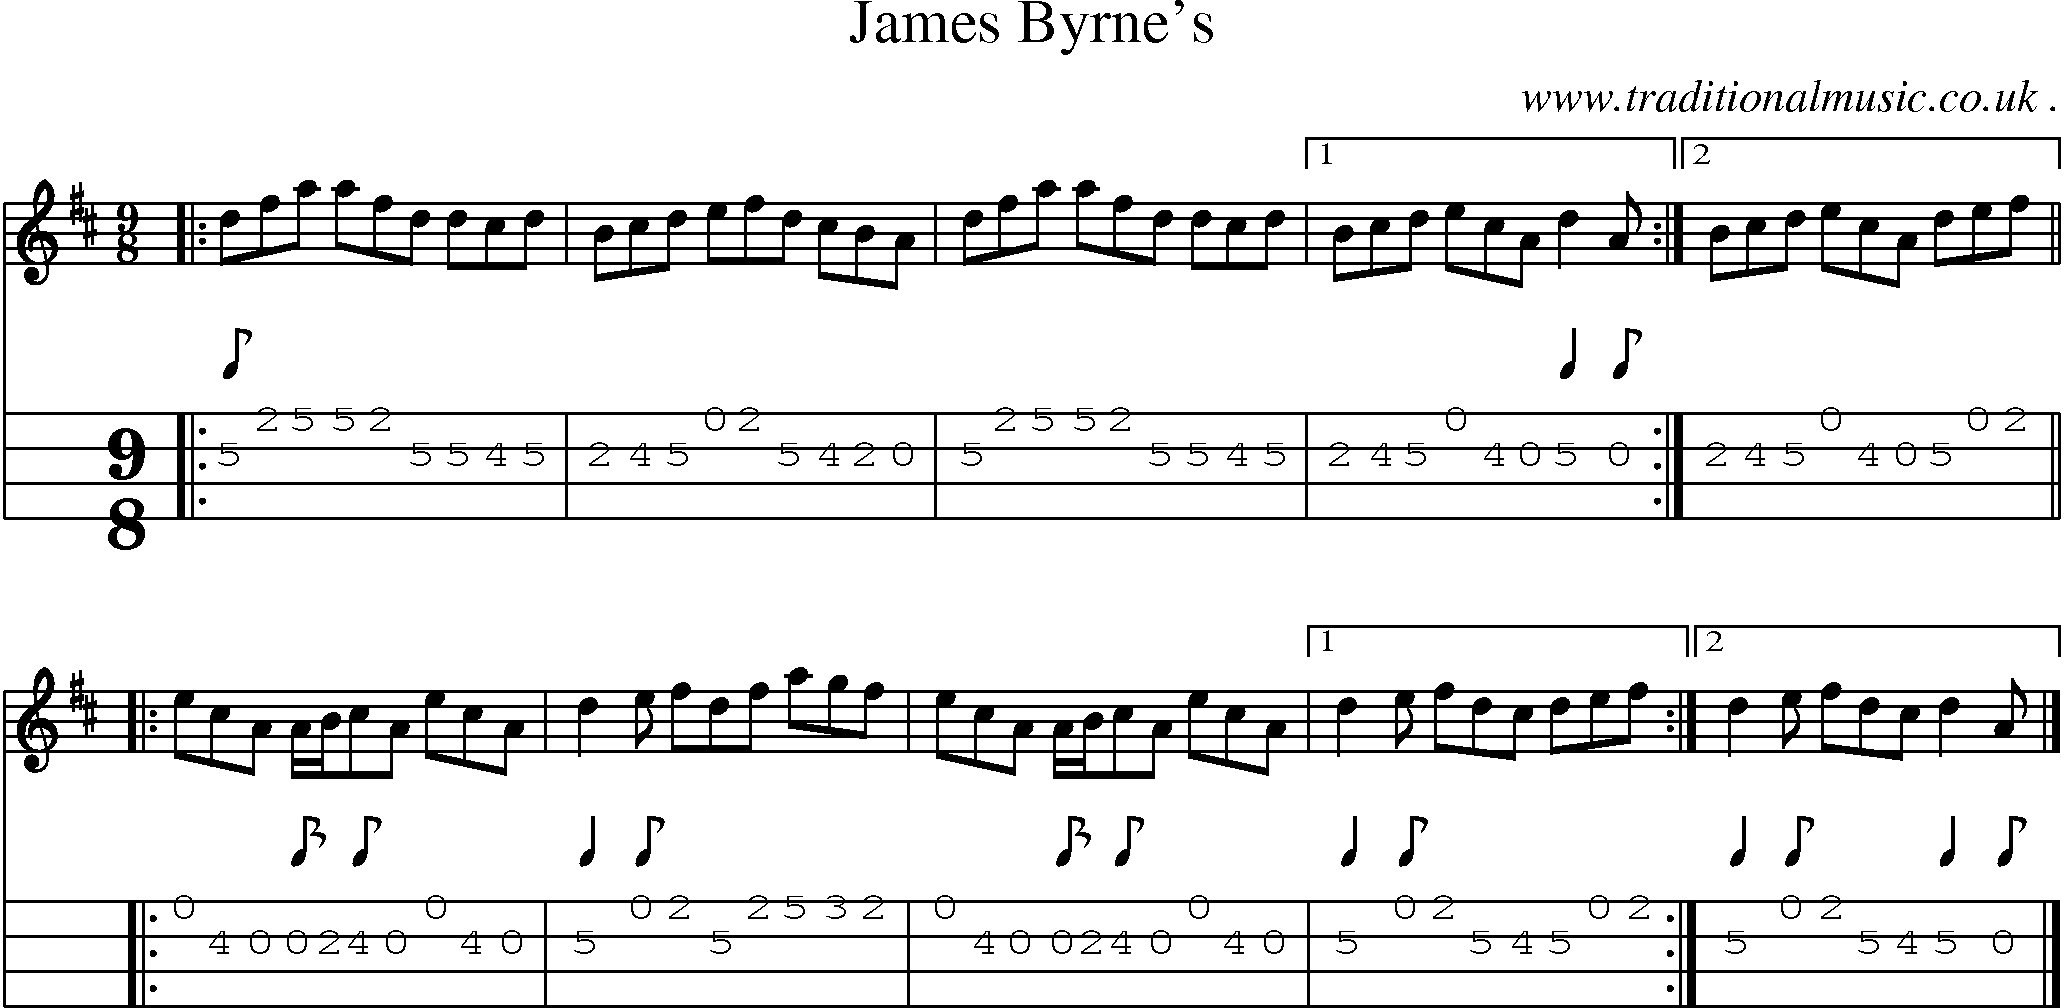 Sheet-music  score, Chords and Mandolin Tabs for James Byrnes